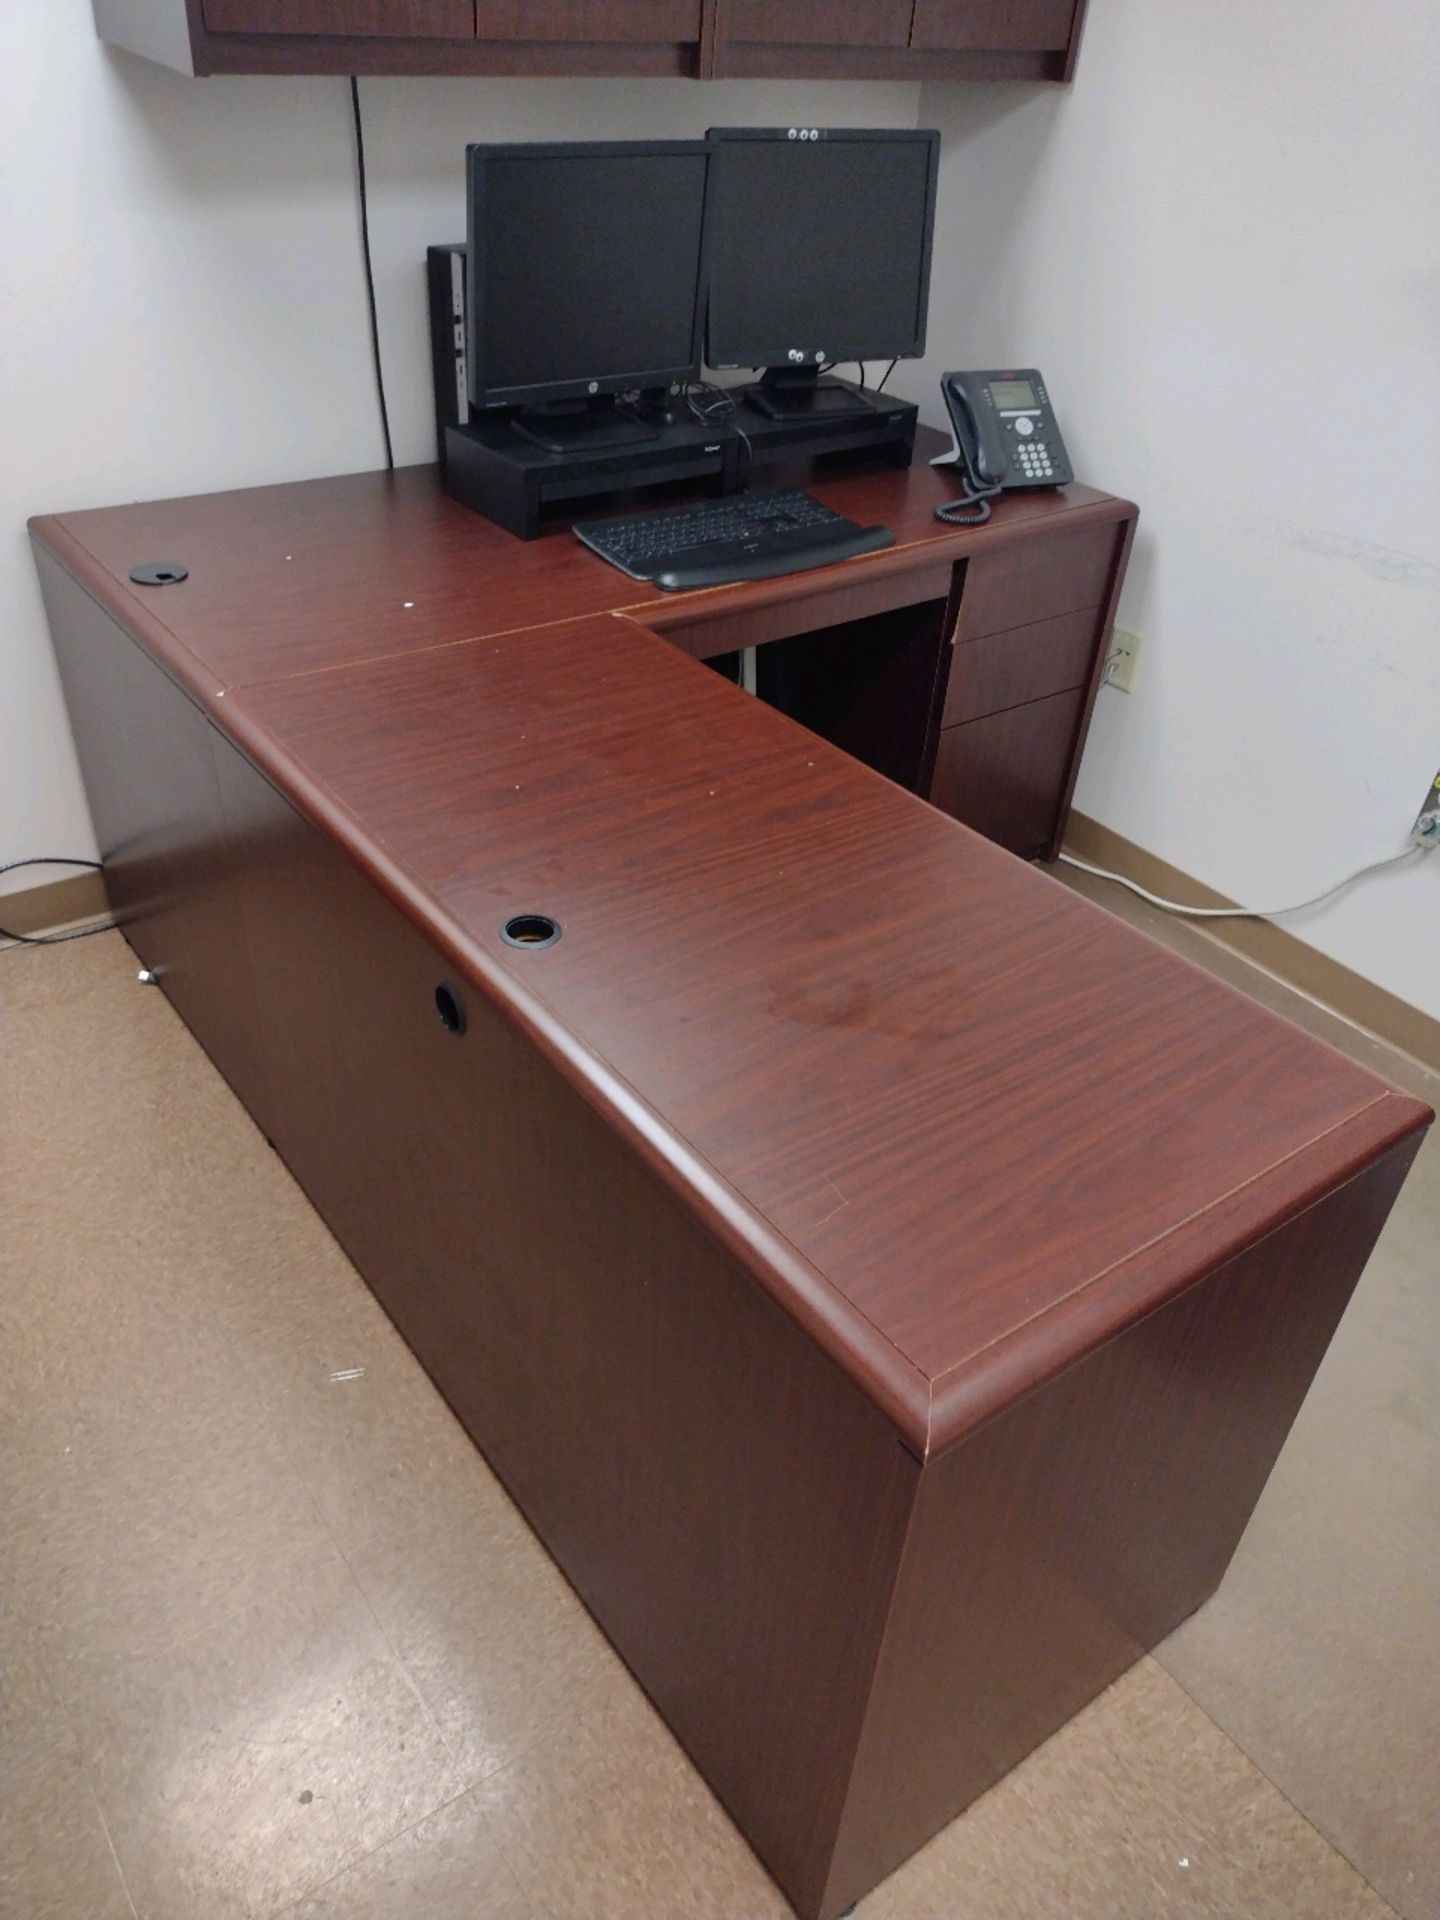 OFFICE TO INCLUDE: DESK WITH OVERHEAD STORAGE, FILE CABINET, 2 SIDE CHAIRS, HP LASERJET PRO